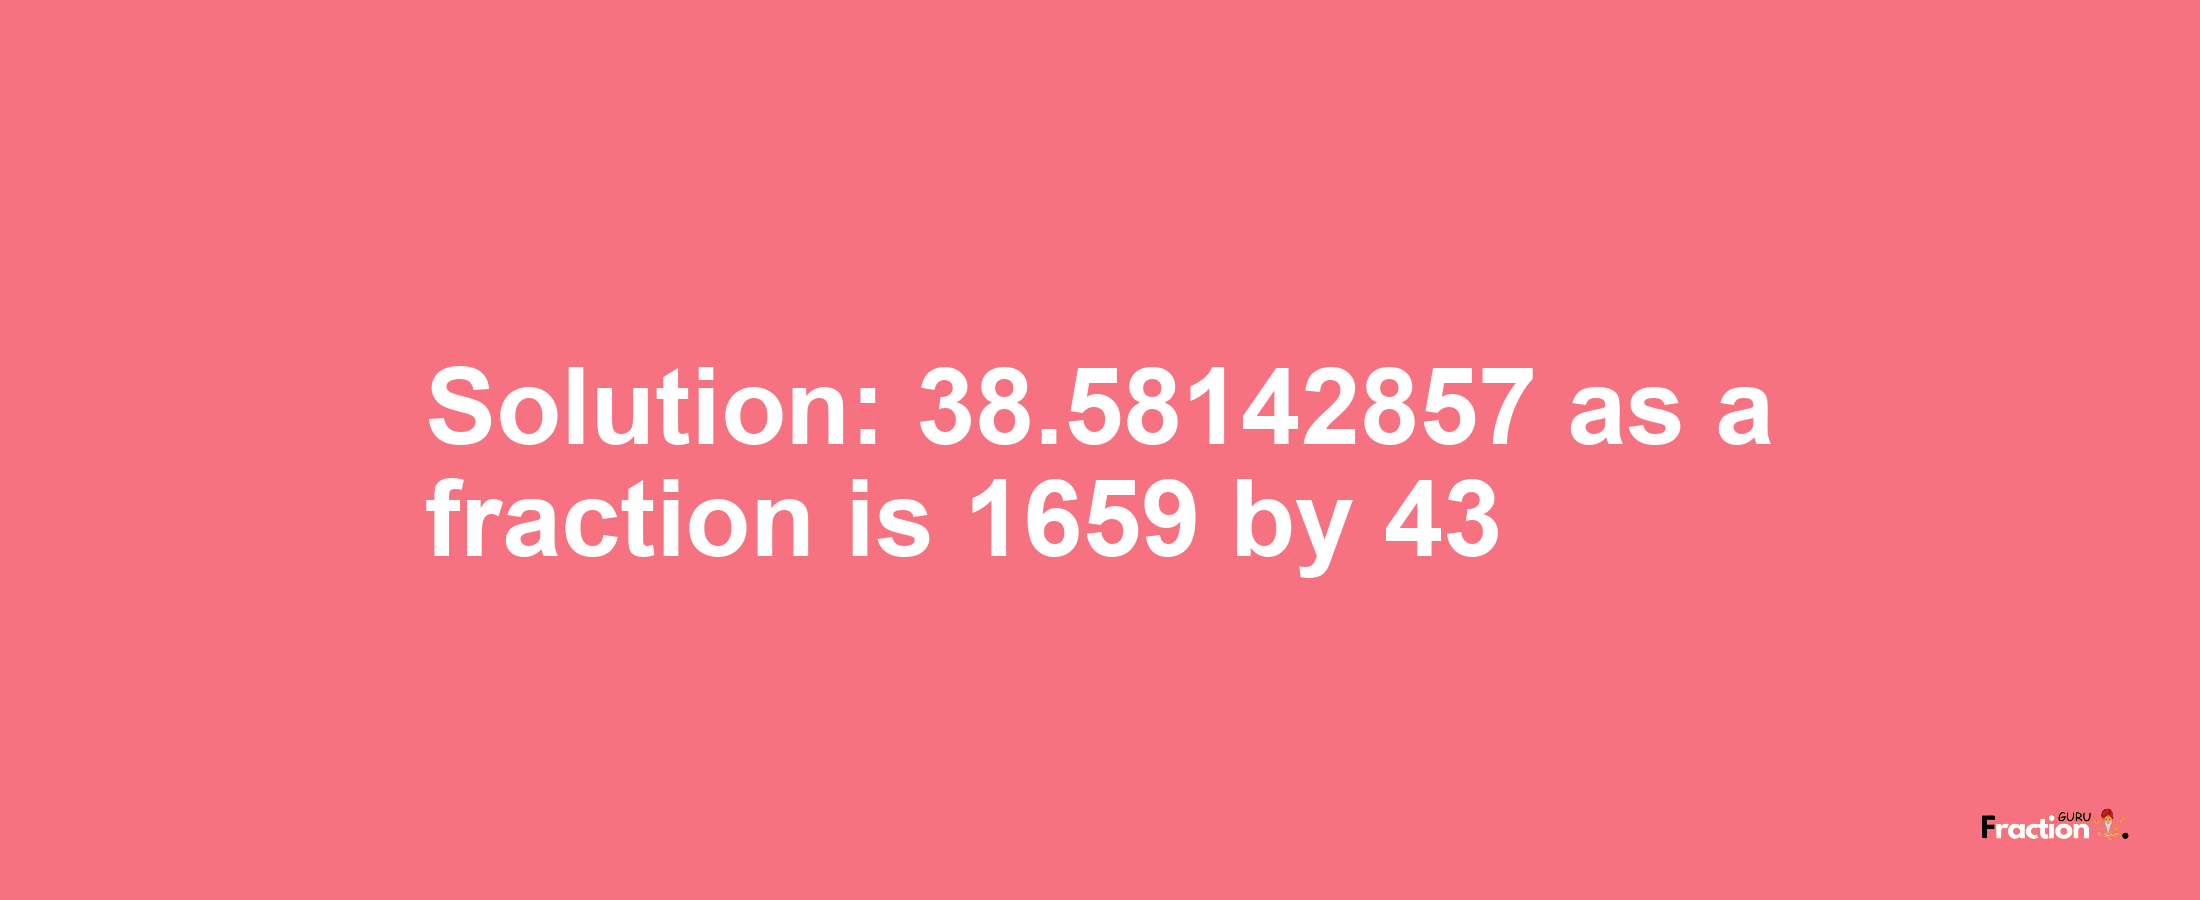 Solution:38.58142857 as a fraction is 1659/43